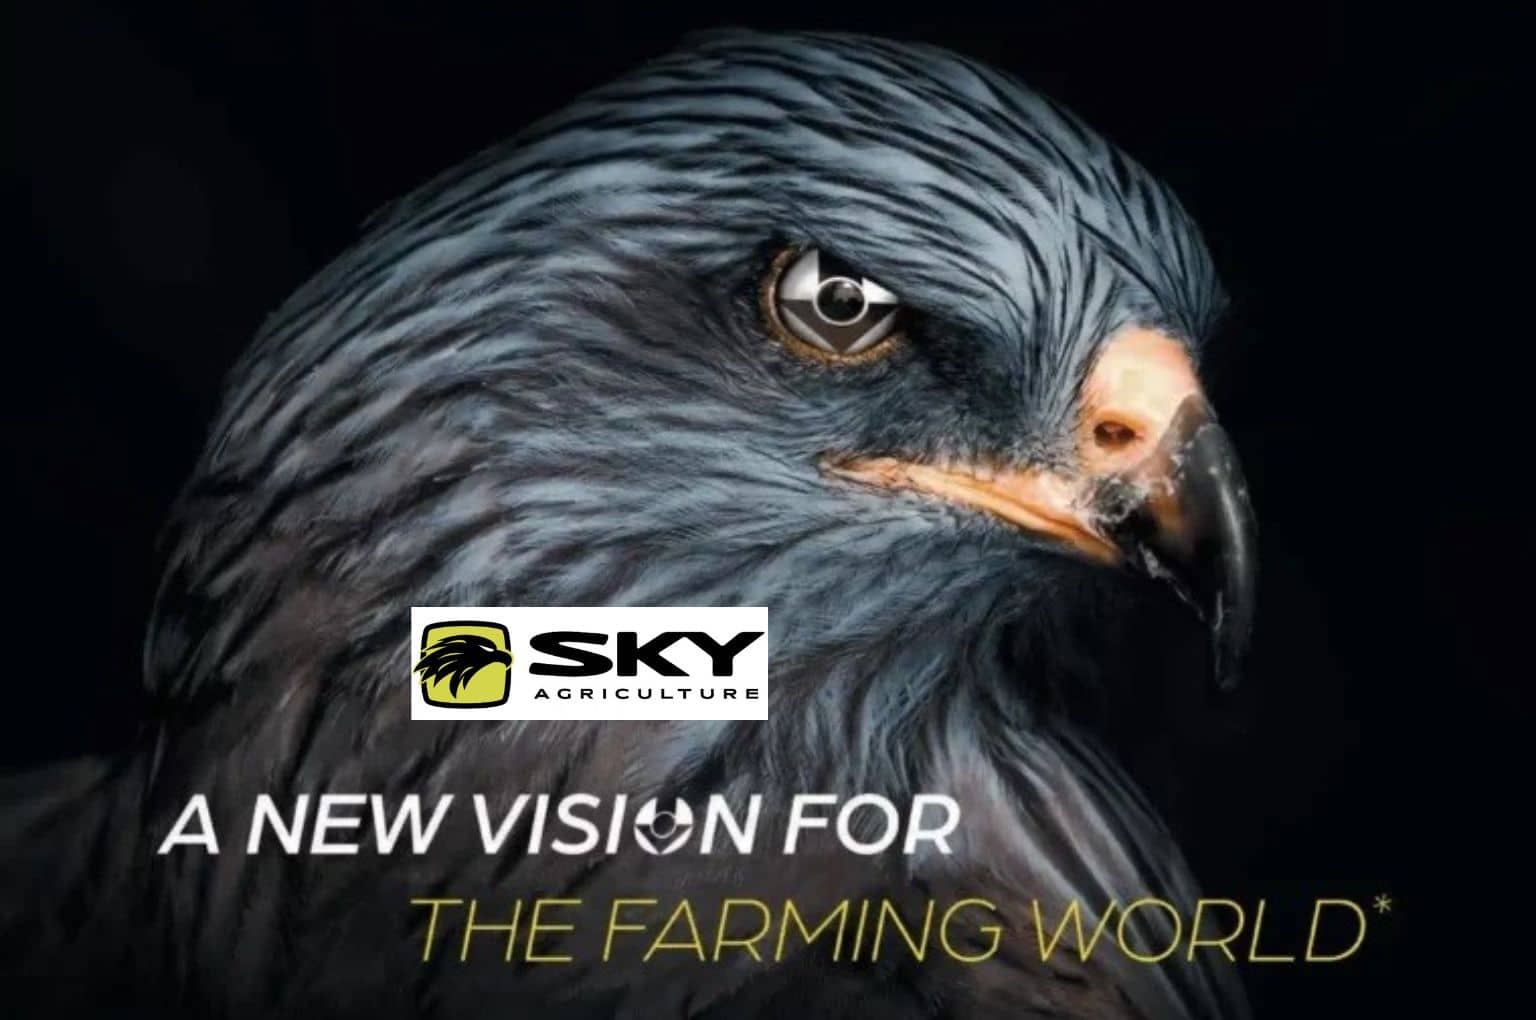 SKY Agriculture